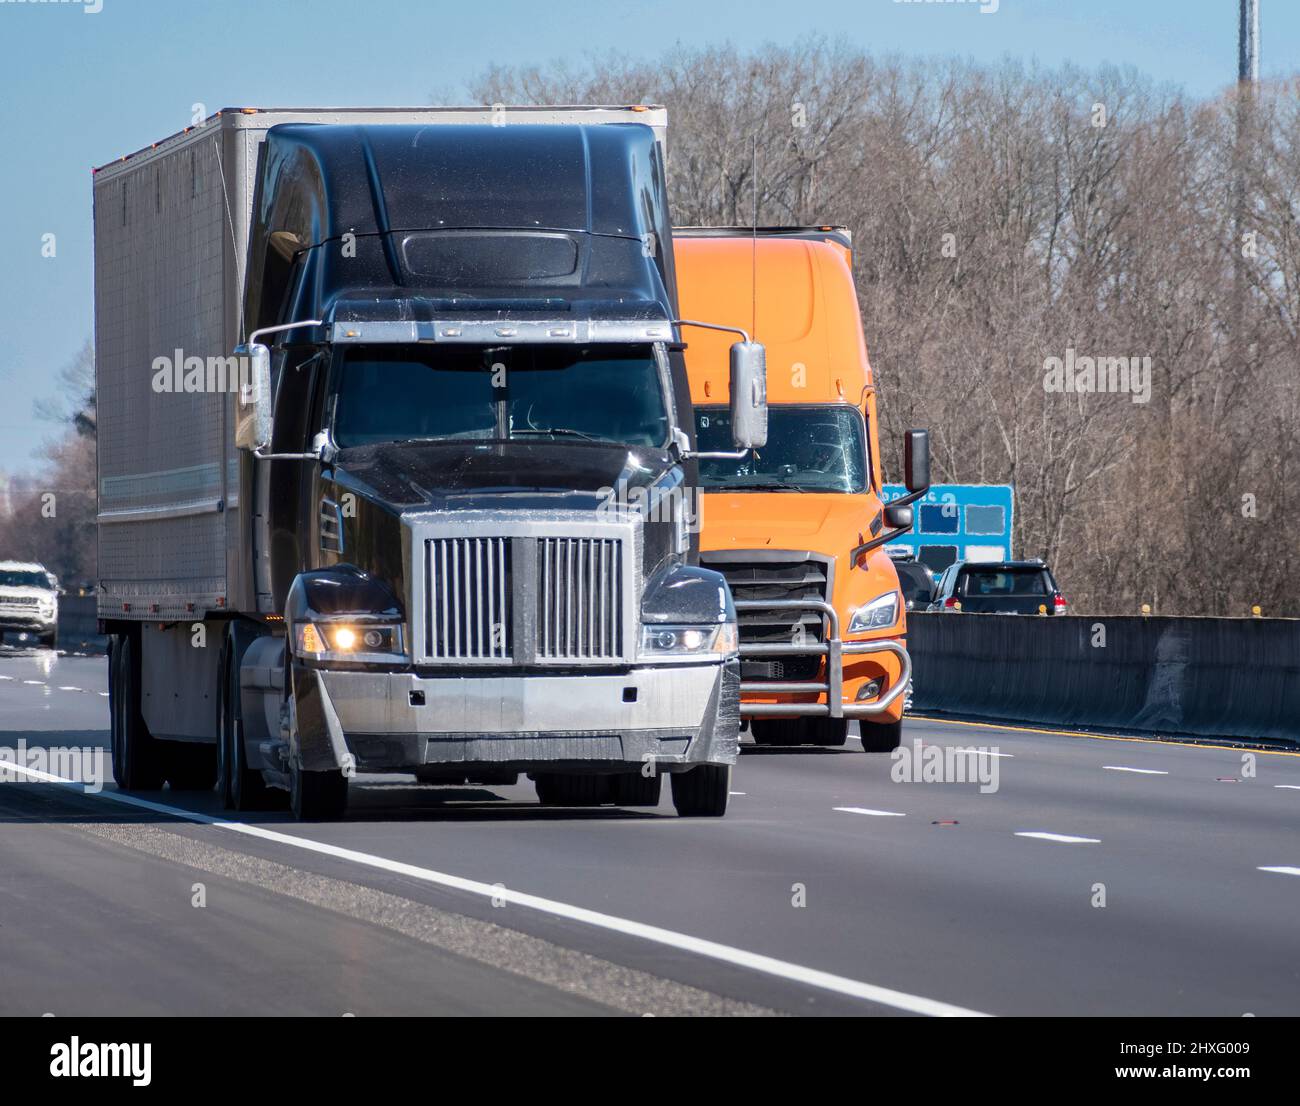 Horizontal shot of two heavy trucks on an interstate highway. Stock Photo